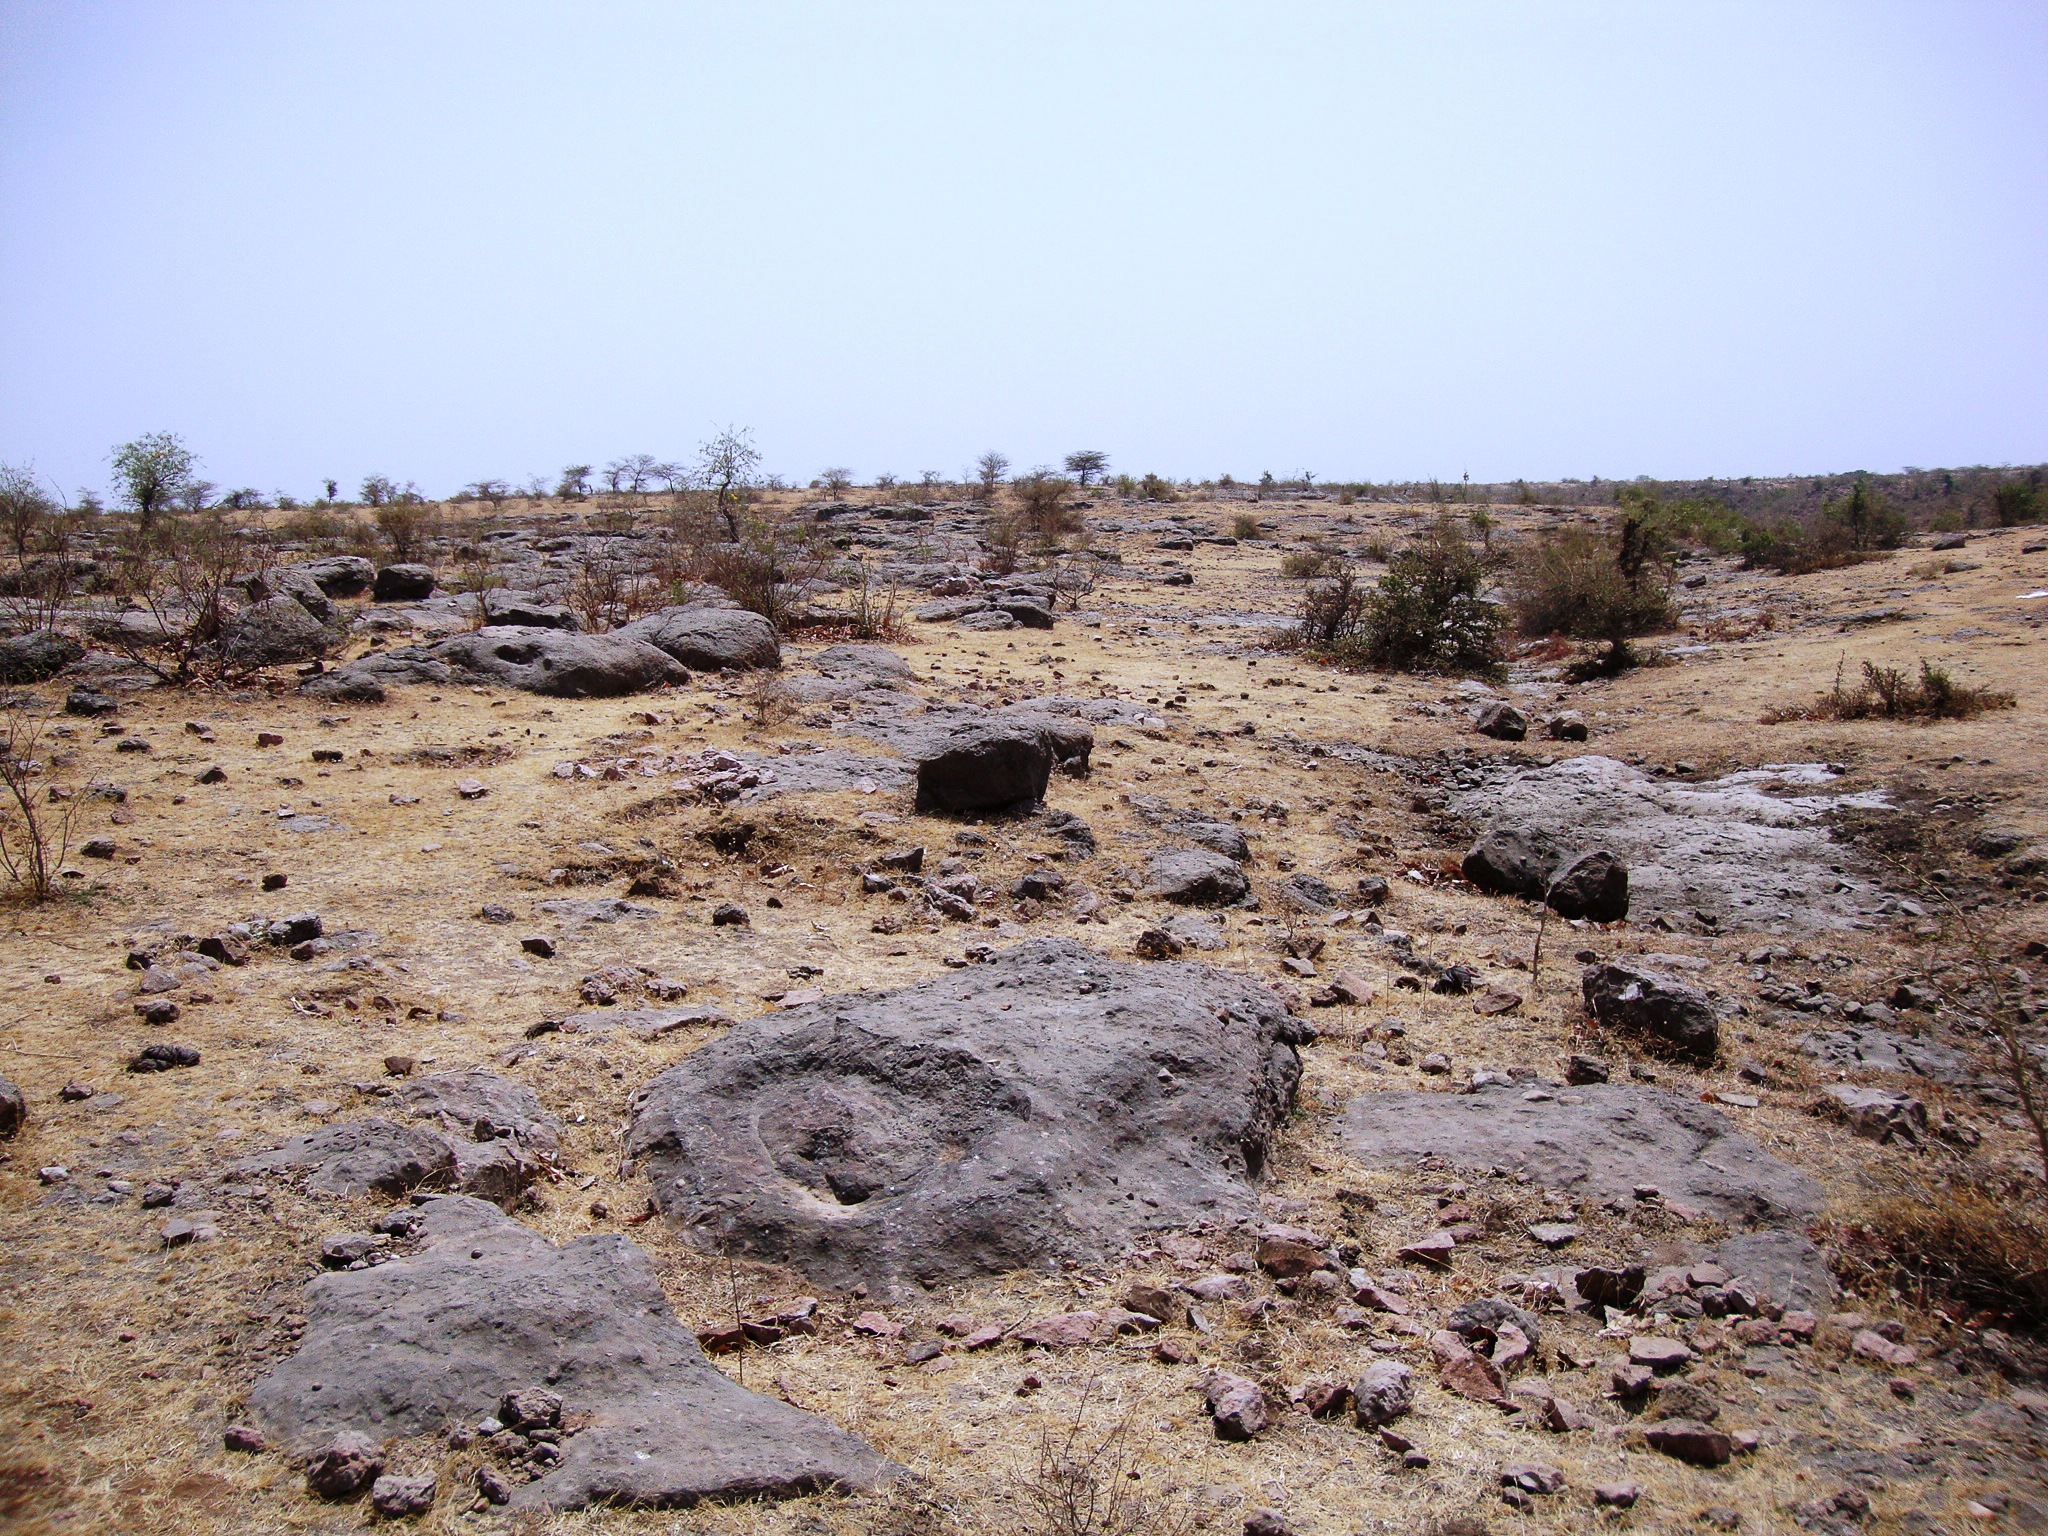 The arid landscape of Dholi Dungri, speckled with rocky outcrops. (Photo courtesy: Dhananjay Mohabey)